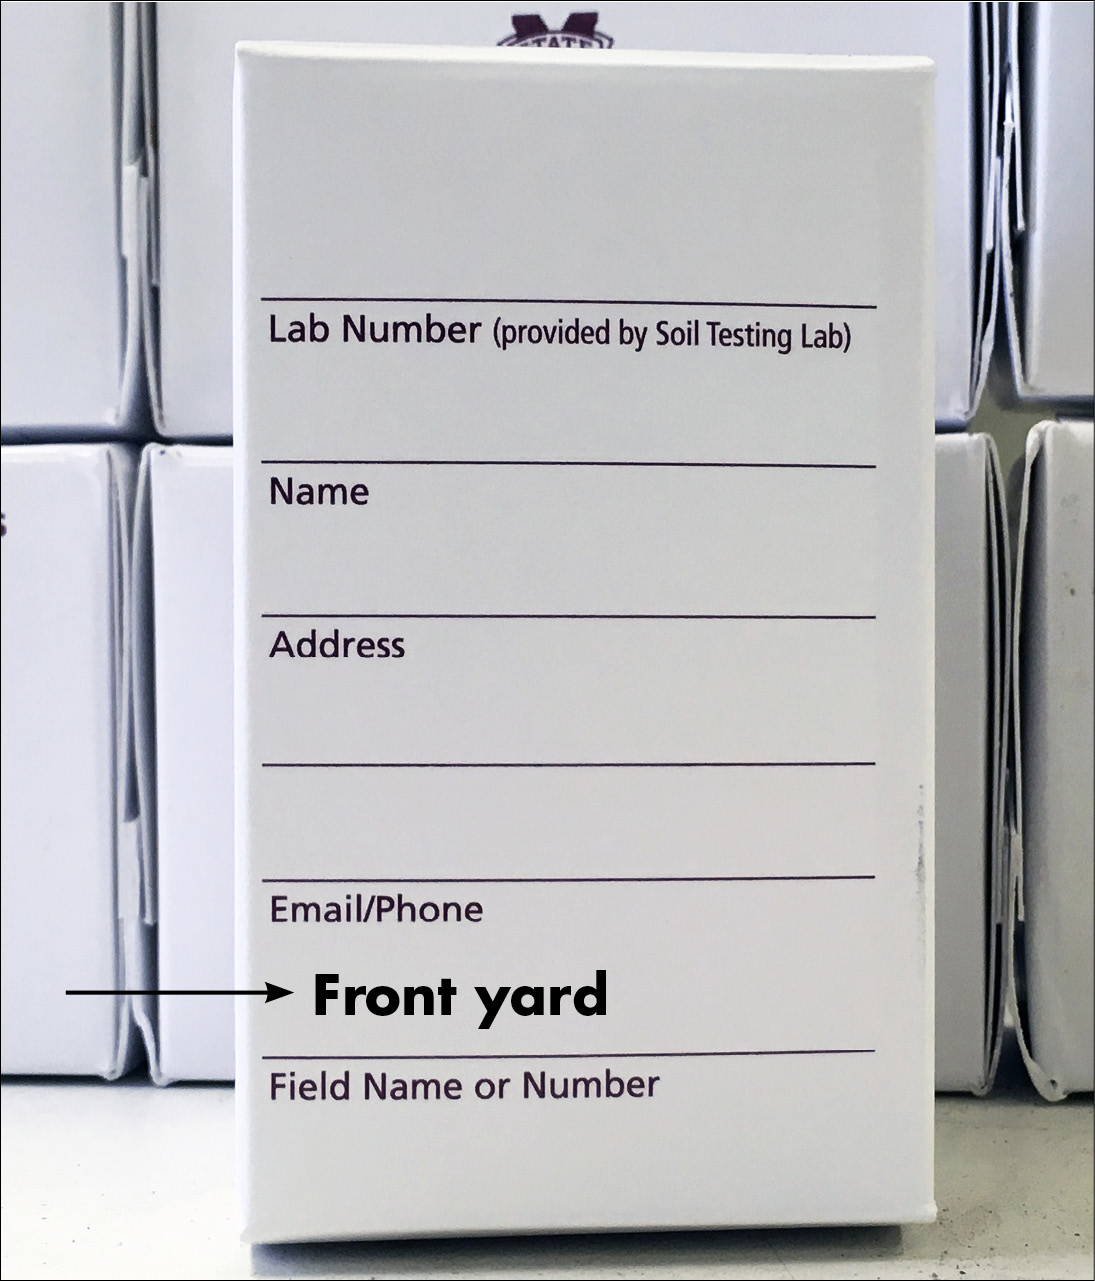 A soil sample box with "front yard" as the field name.